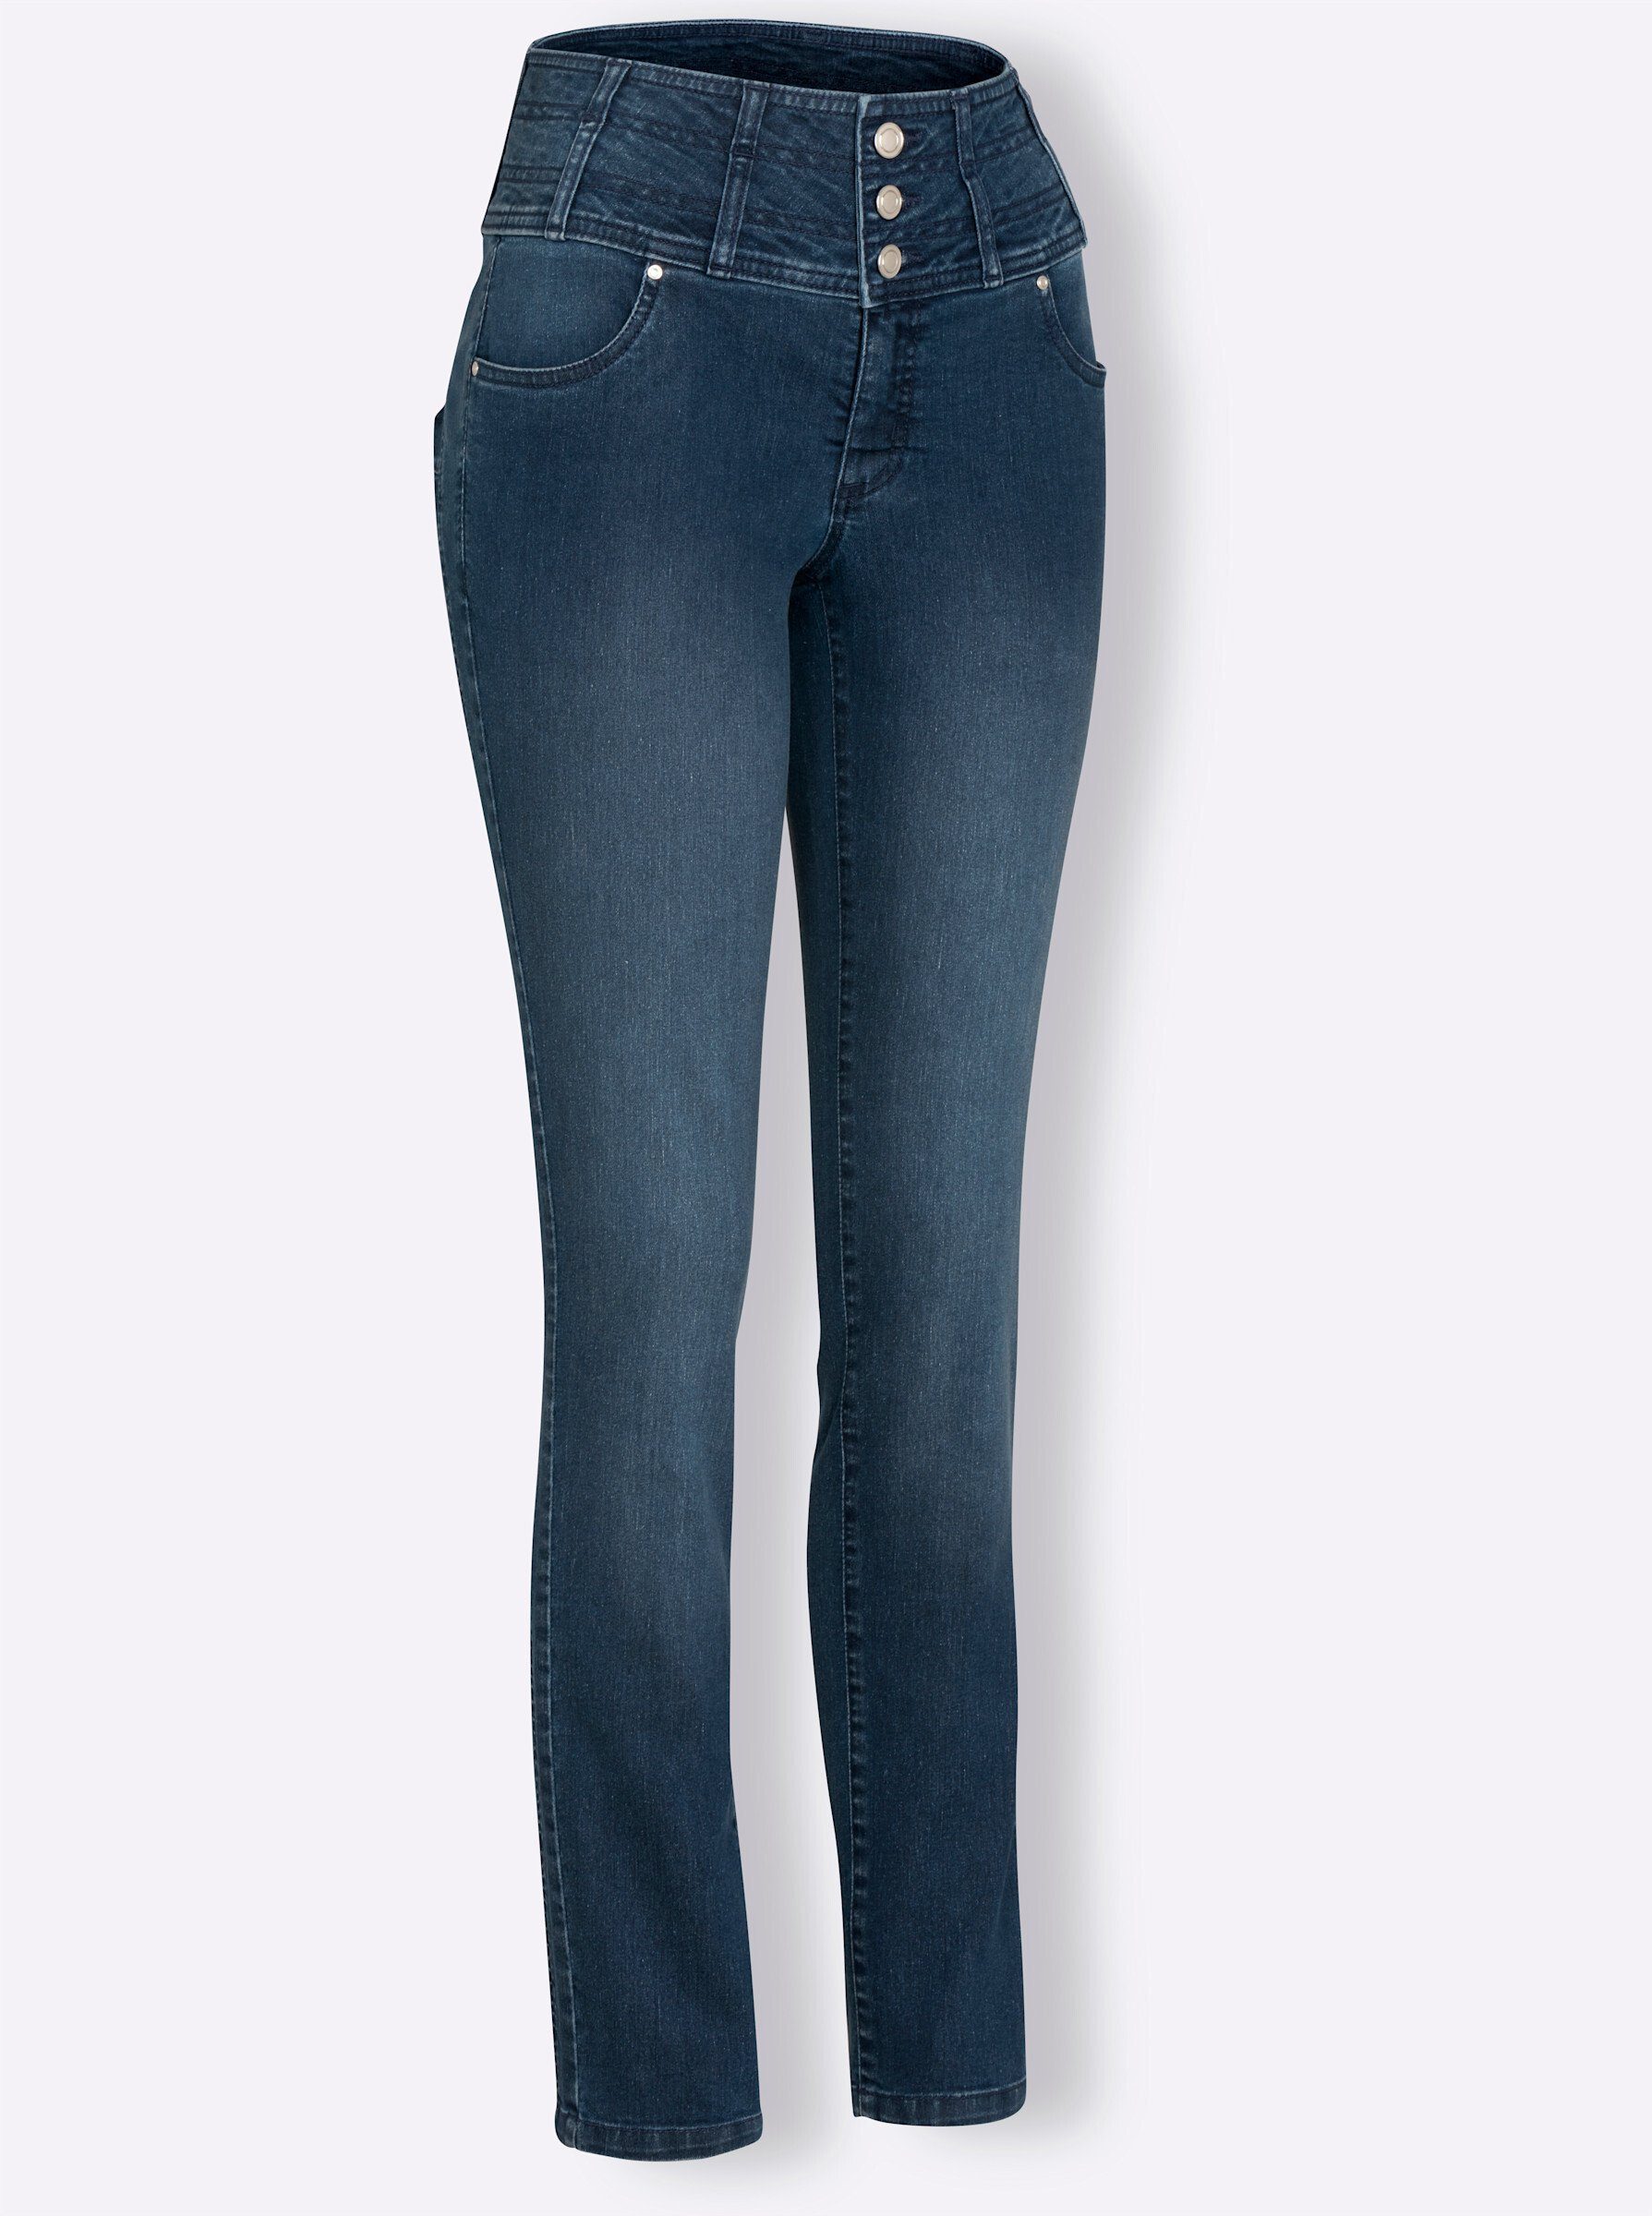 Jeans Bequeme an! Sieh blue-stone-washed